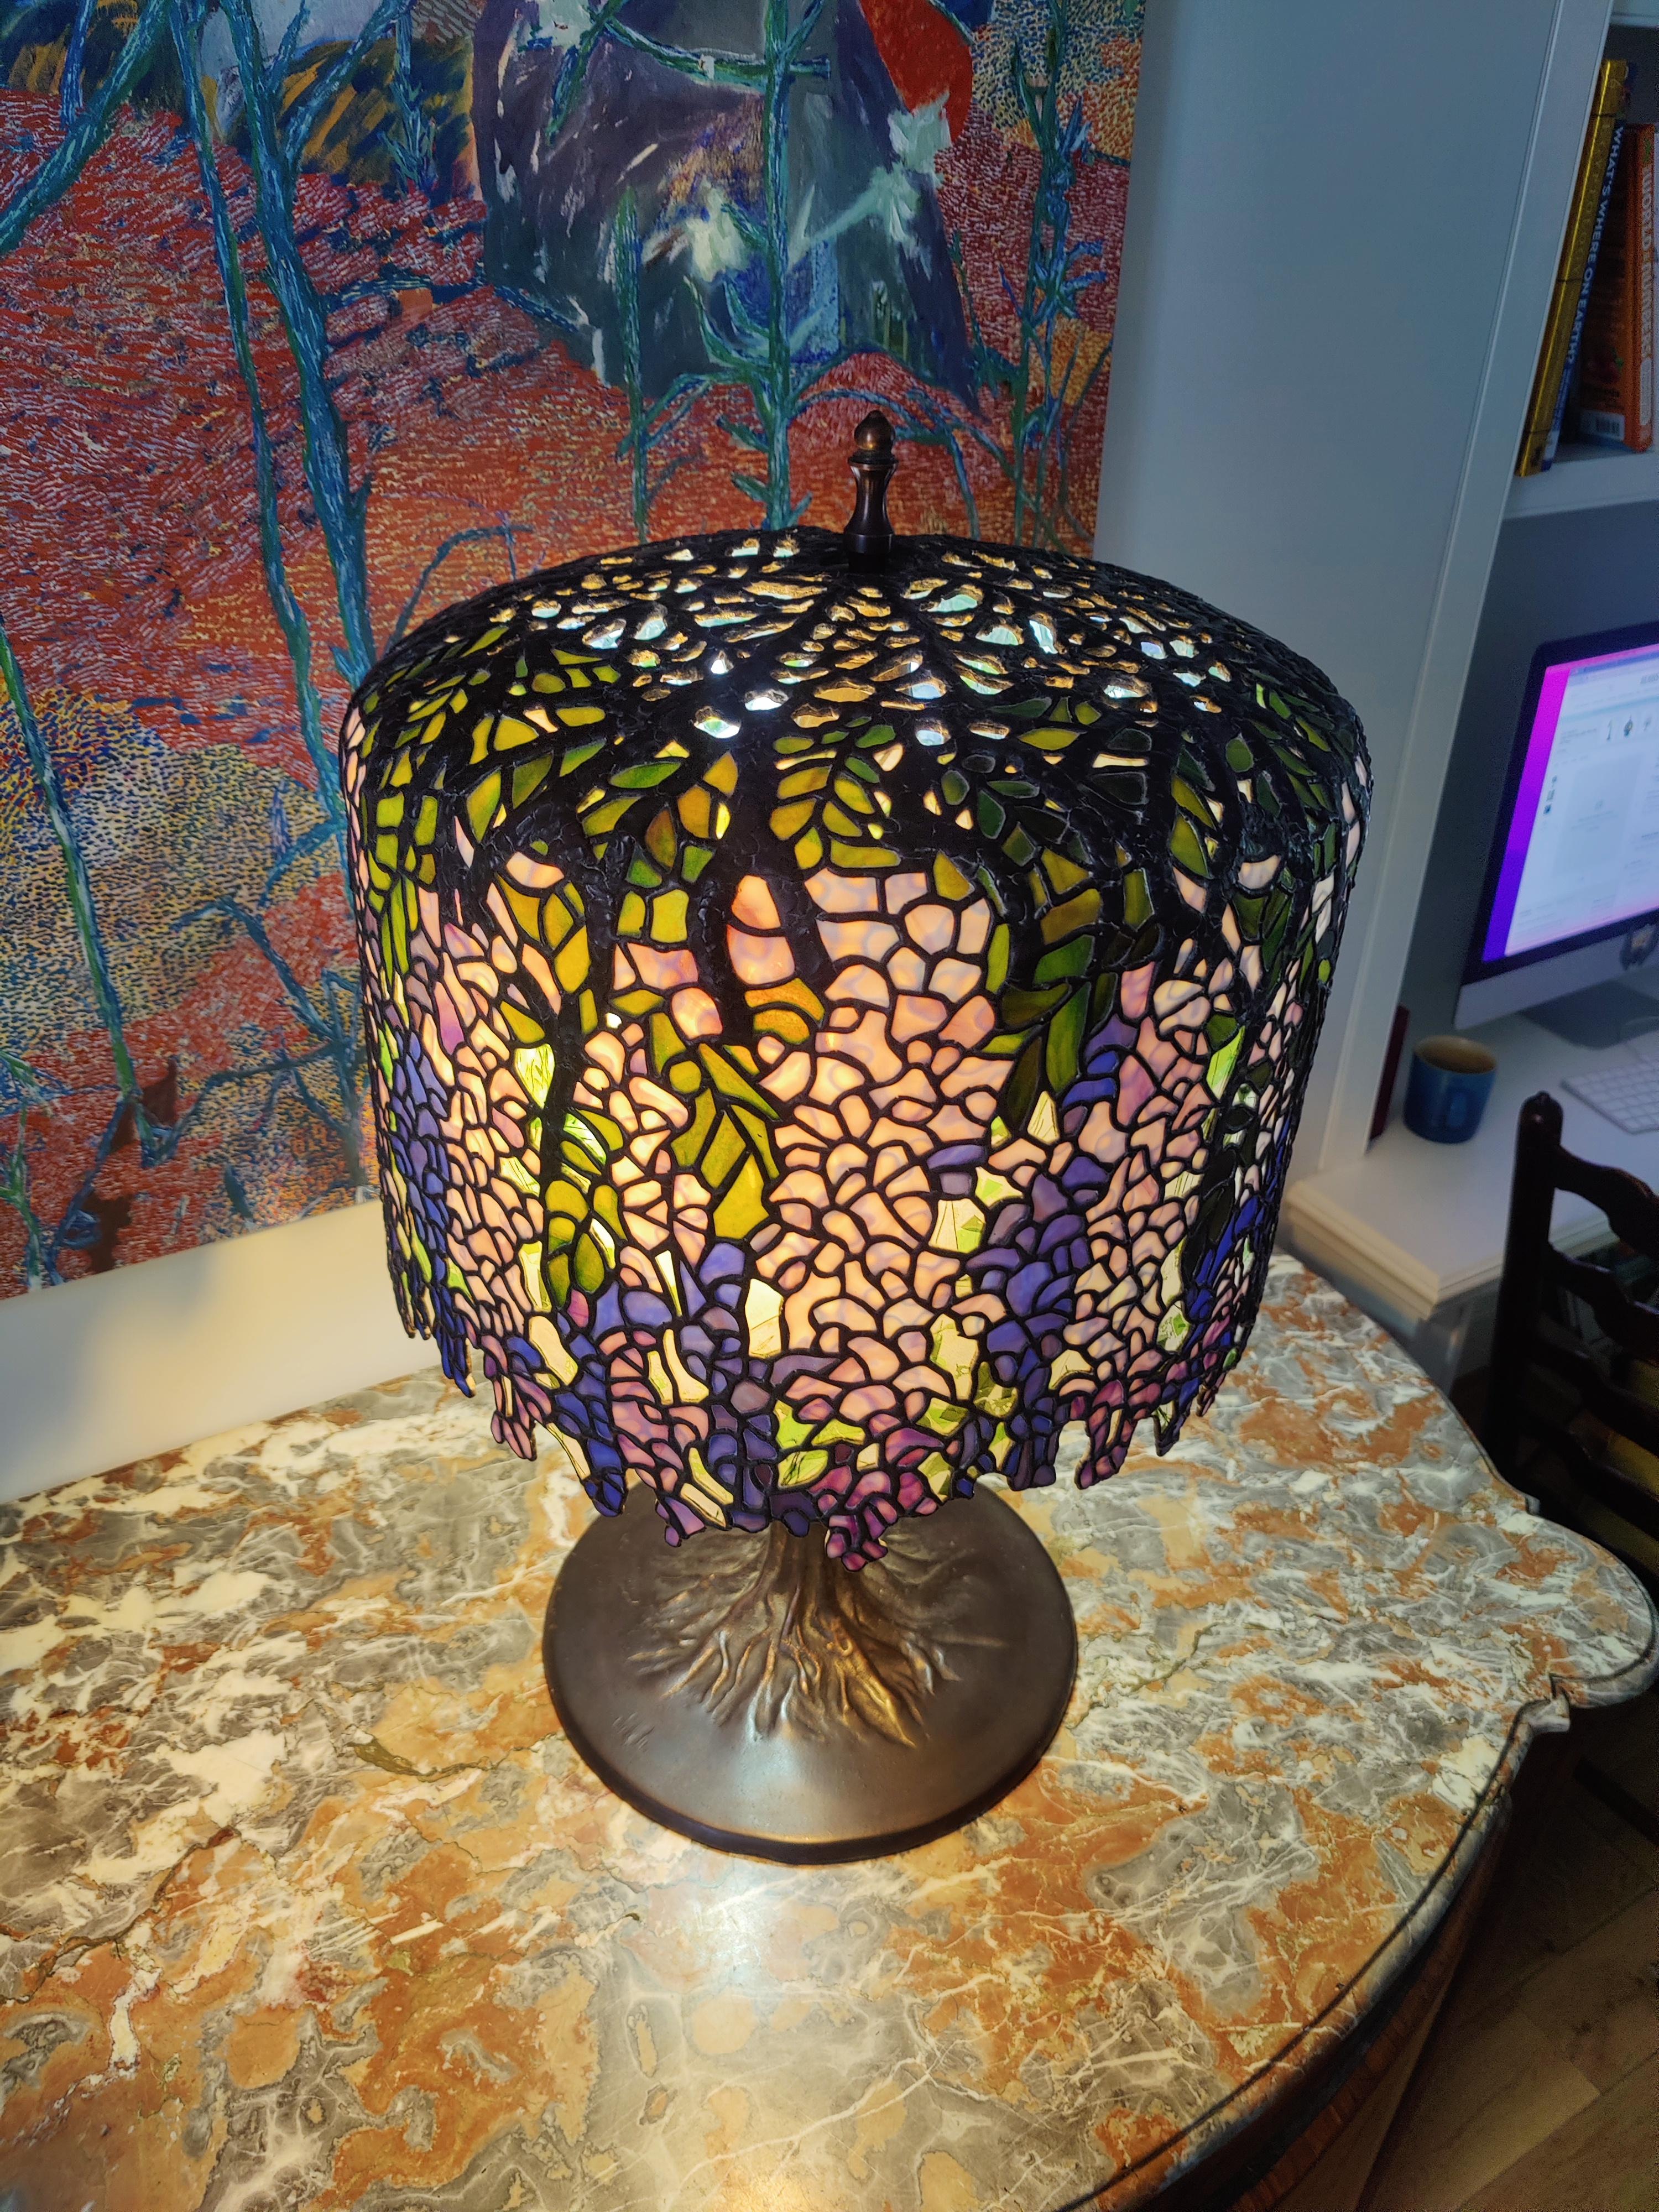 Vintage Wisteria Large Tiffany Table Lamp, 20th Century In Good Condition For Sale In London, by appointment only